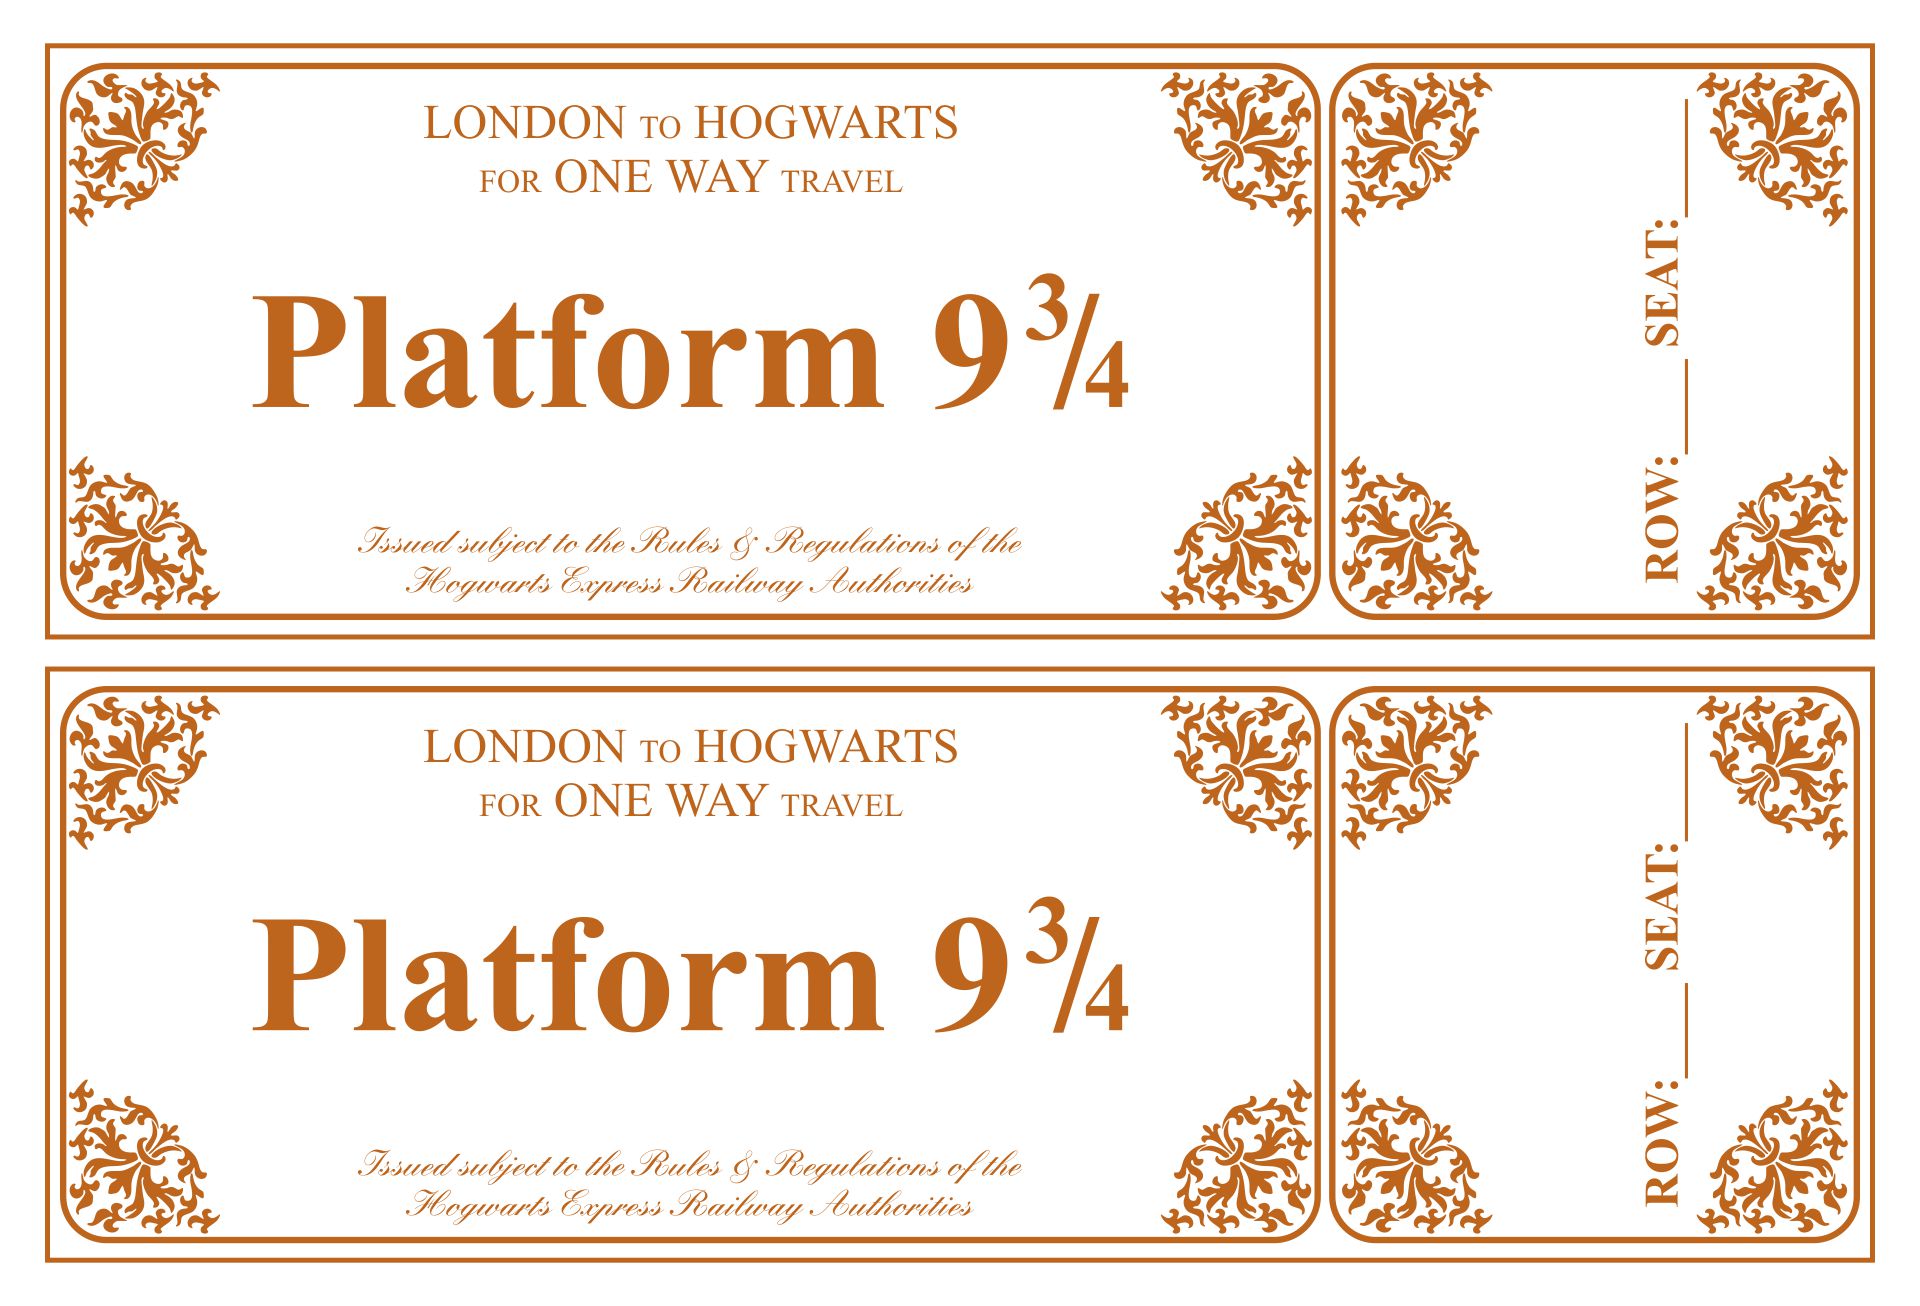 Harry Potter Diagon Alley Map Free Knight Bus Ticket & Hogwarts Express ticket 